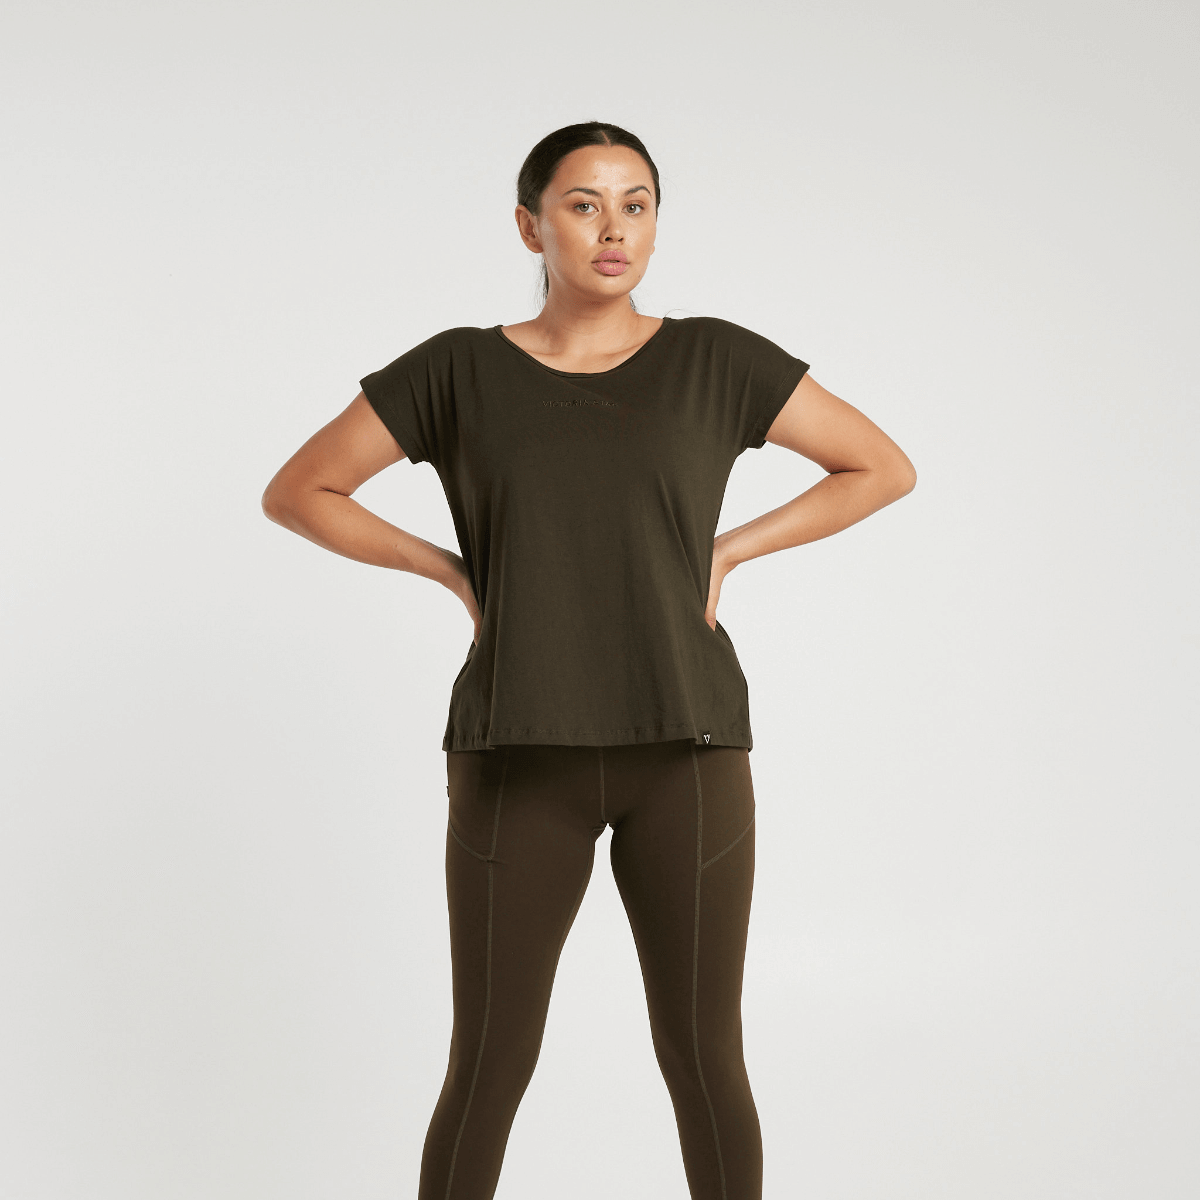 Victoria Stag Core Cap Sleeved Tee in Khaki